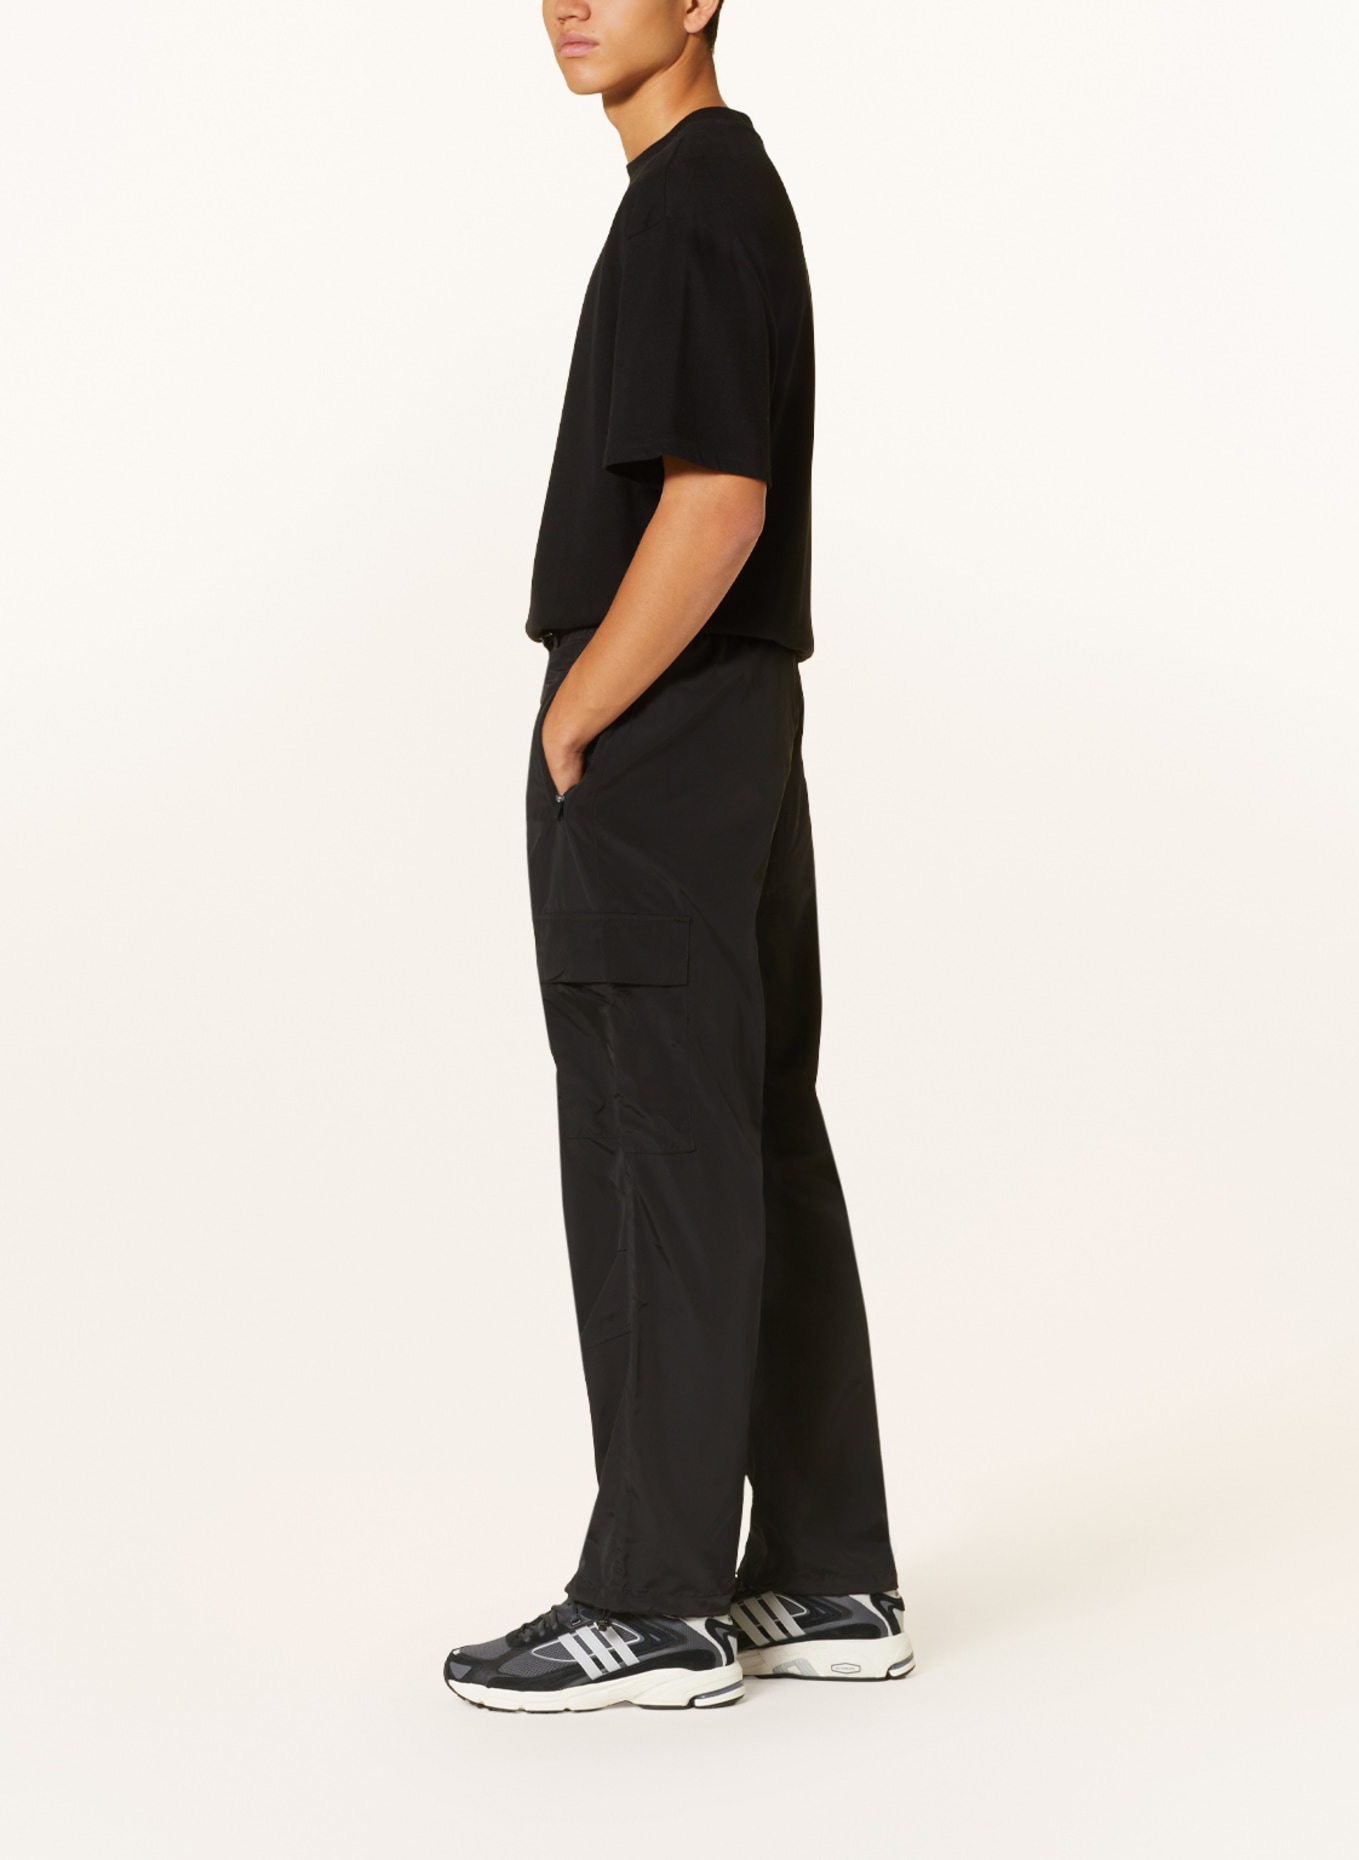 LACOSTE Cargohose Relaxed Fit, Farbe: SCHWARZ (Bild 4)